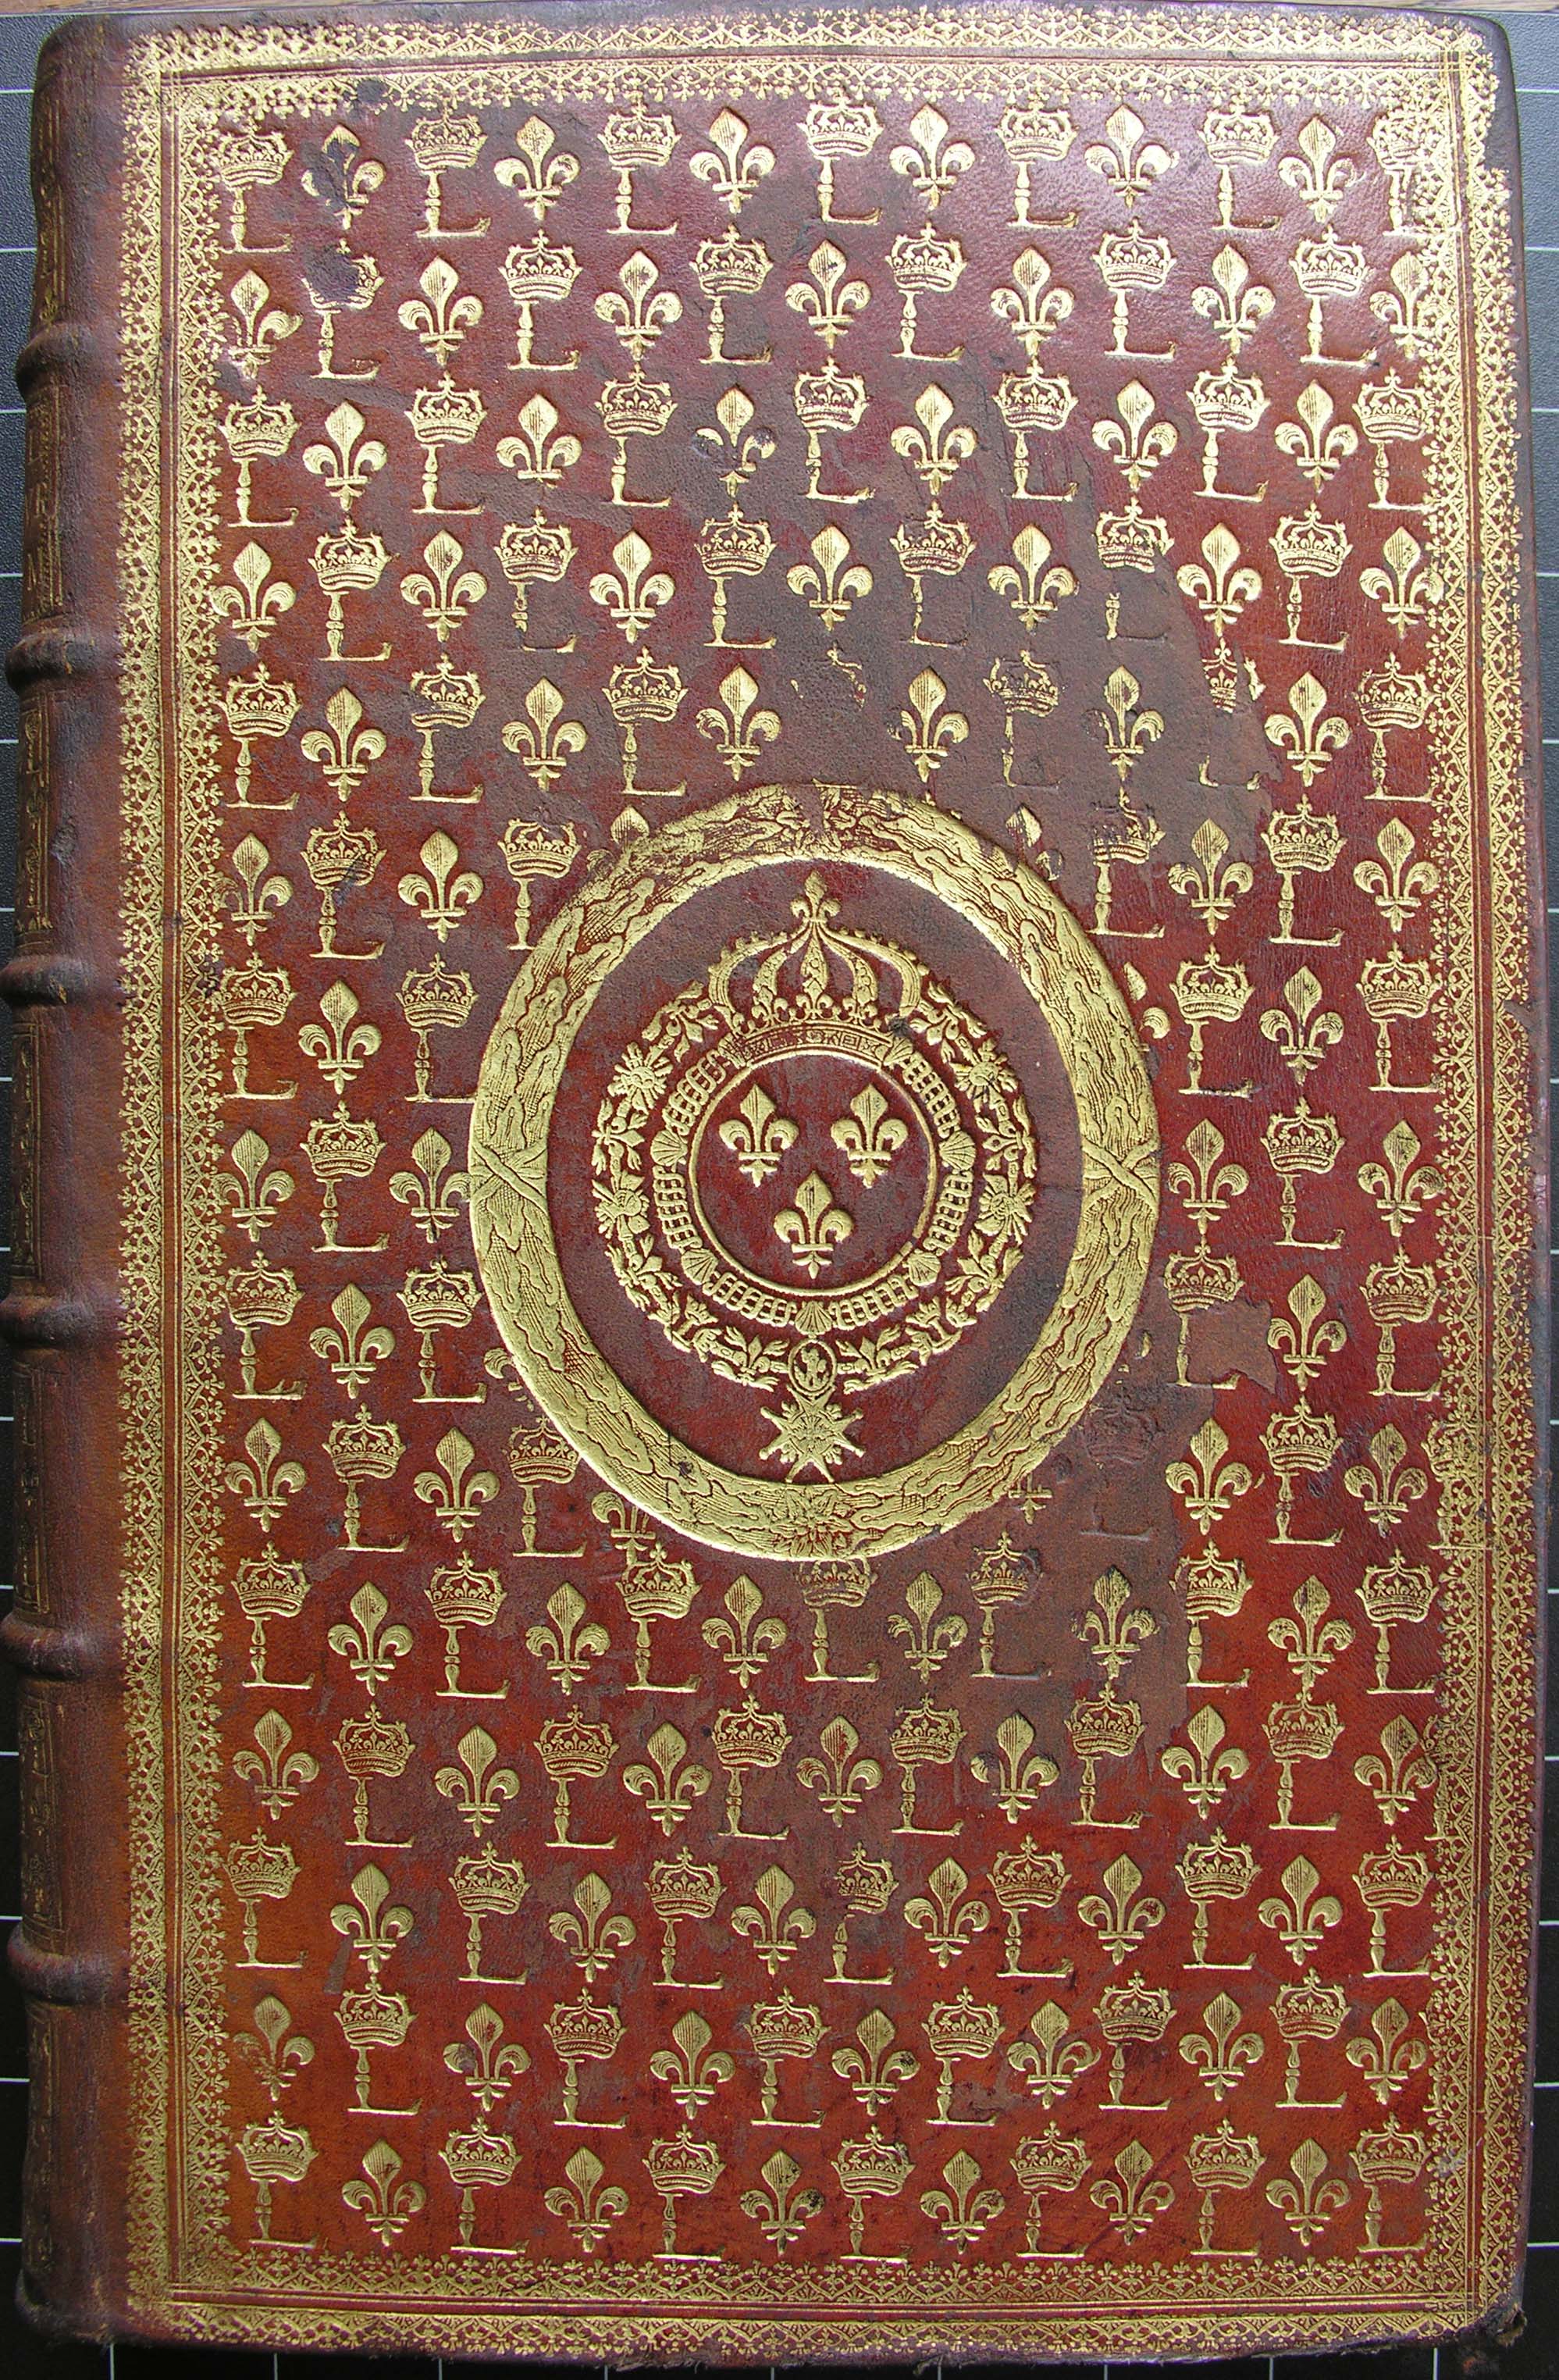 An elaborate red and gold binding covered in fleur de lys.